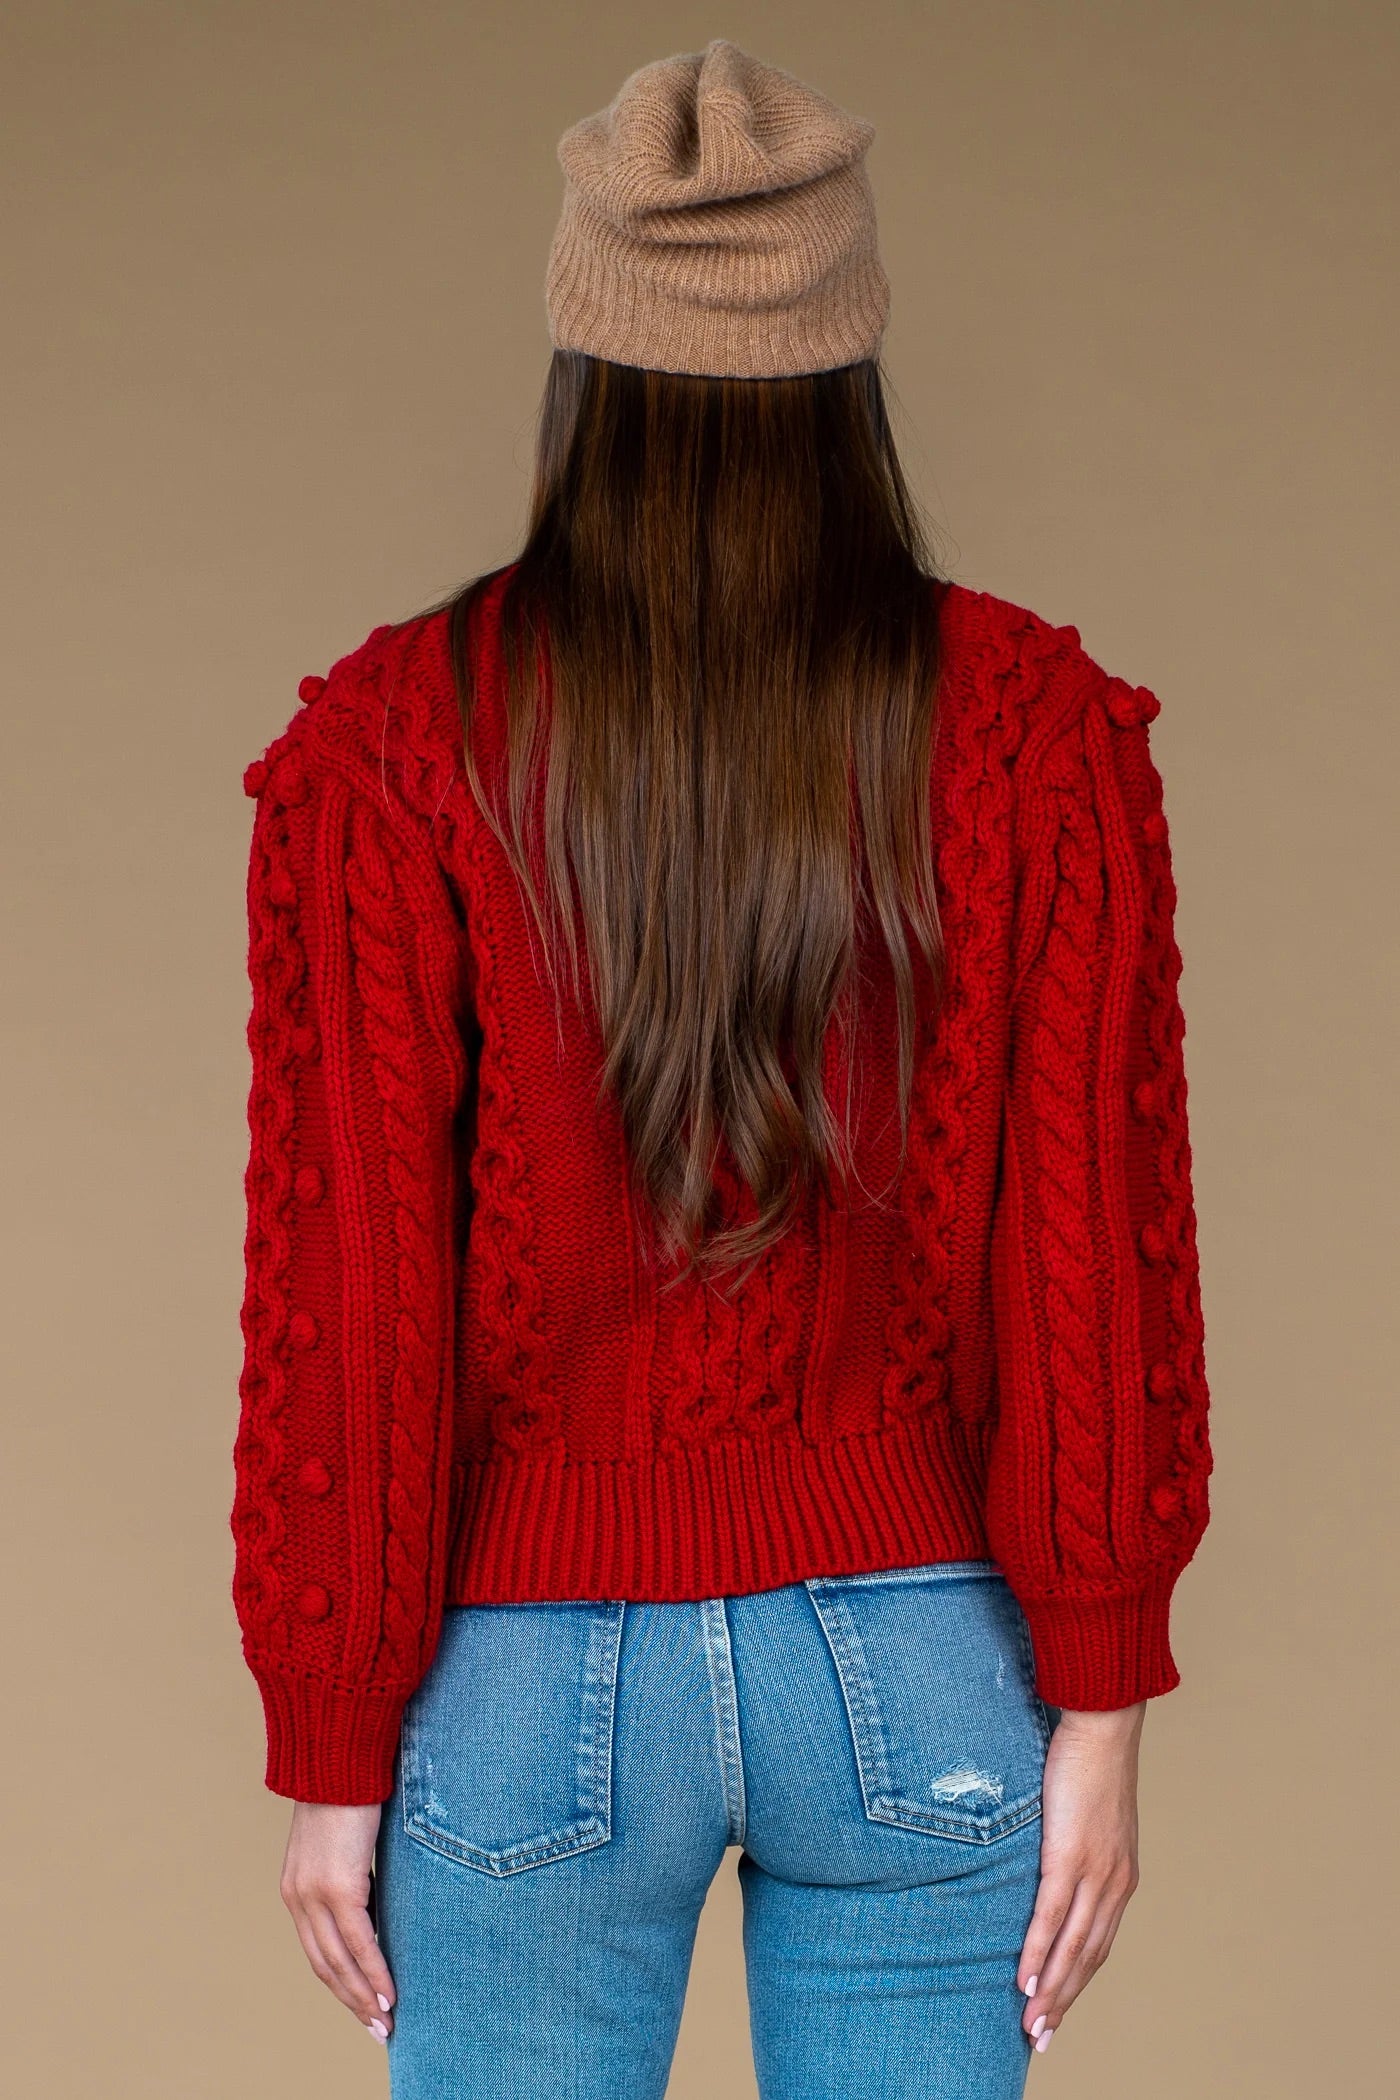 Olivia James The Label Poppy Bubble Knit Sweater in Berry